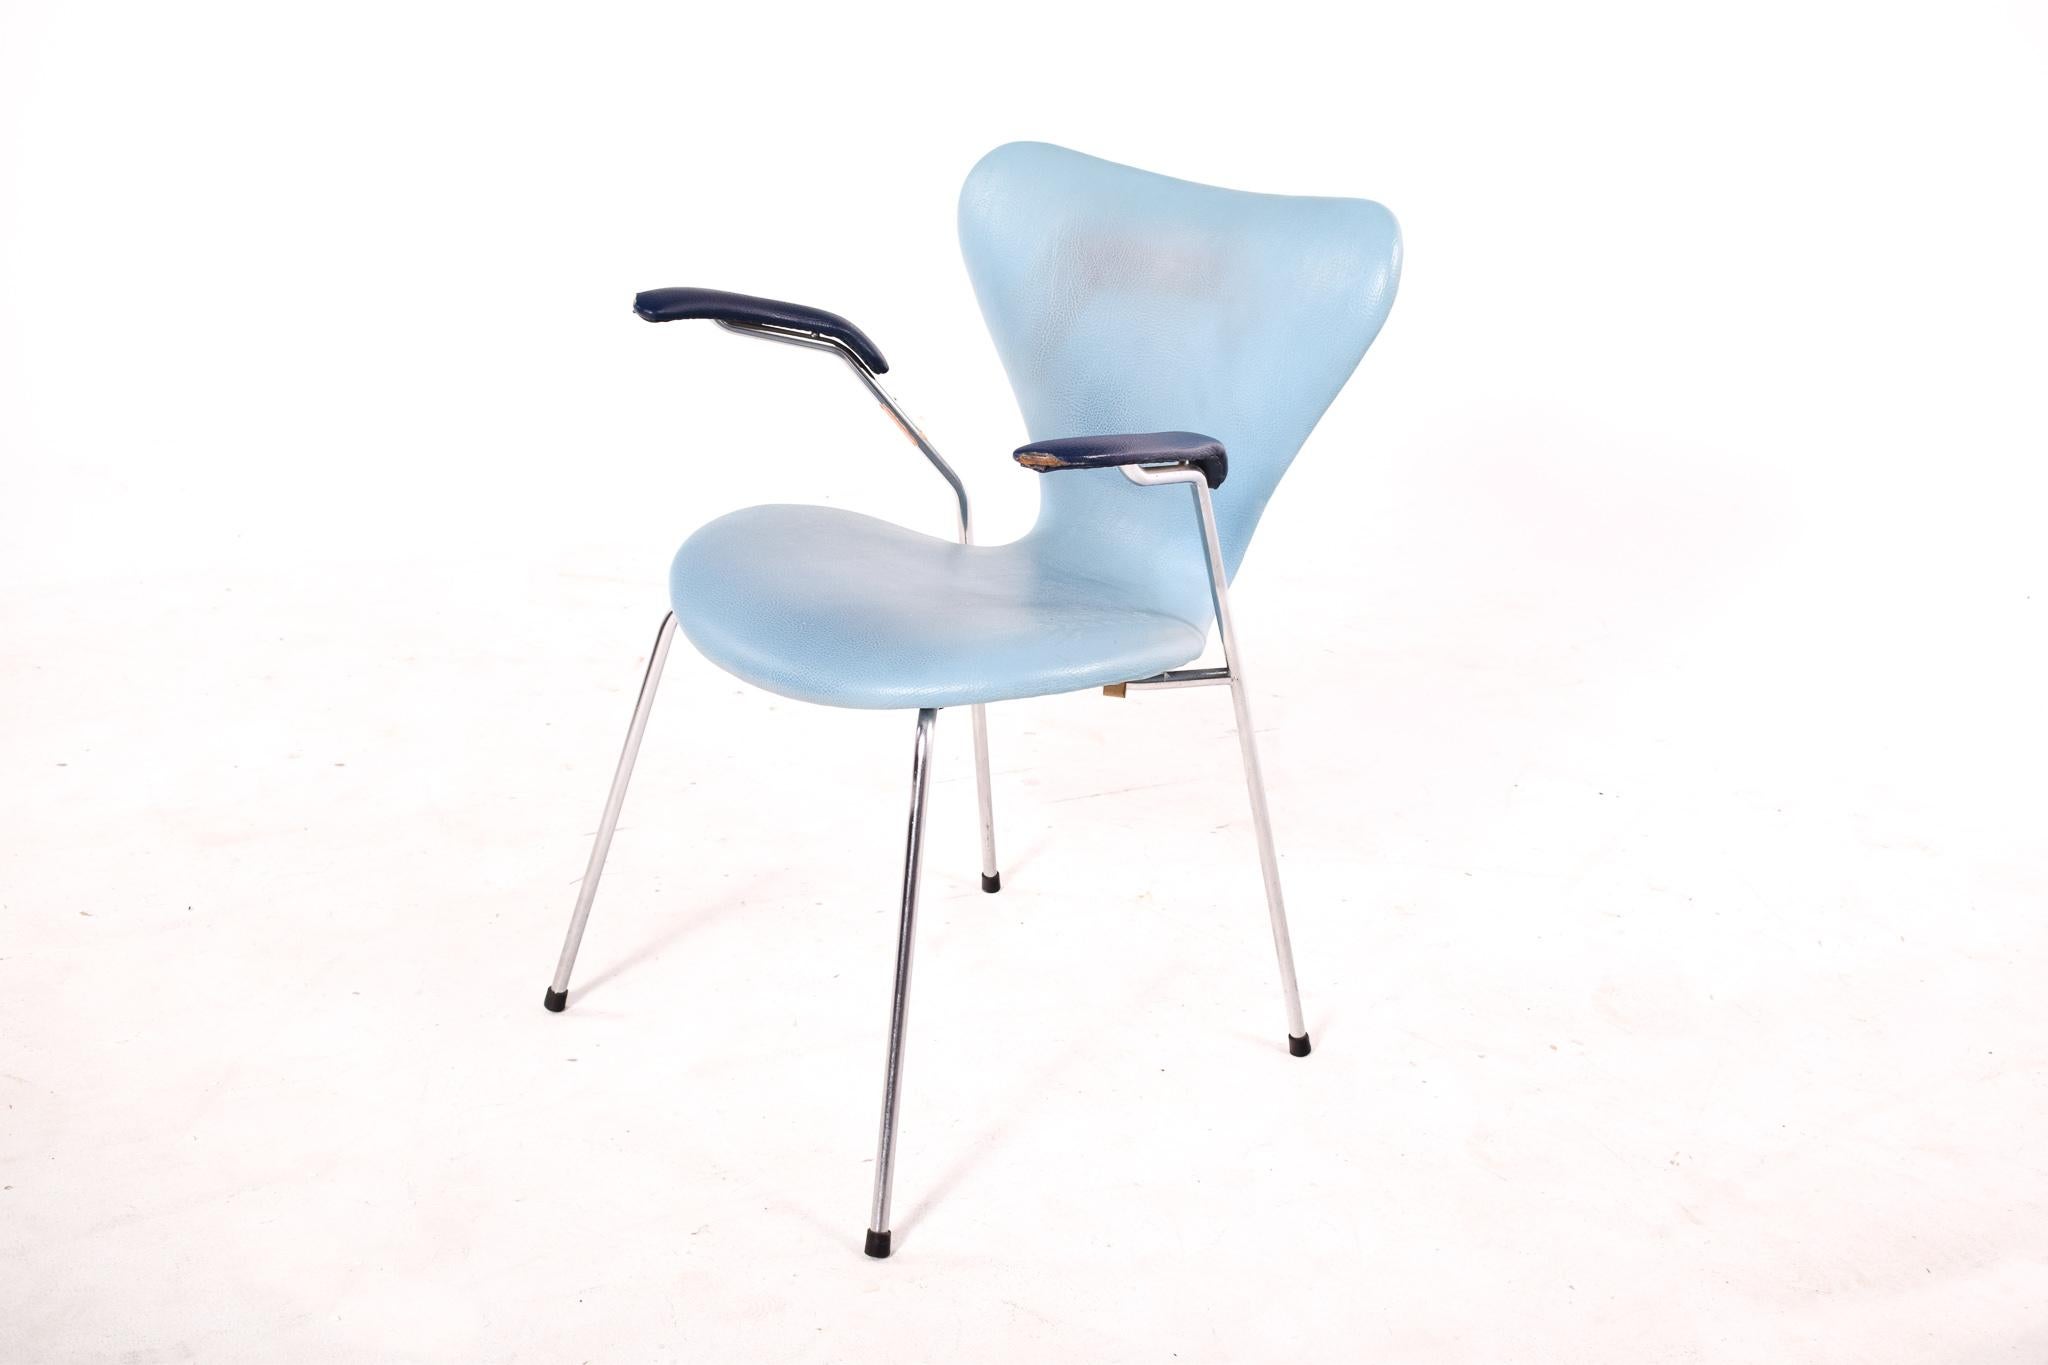 Sseries 7 armchair, Arne Jacobsen design, plywood vinyl lined in blue, produced by Fritz Hansen. Metal structure, seat, armrests and back are made of molded plywood. It's signed underside of the seat.